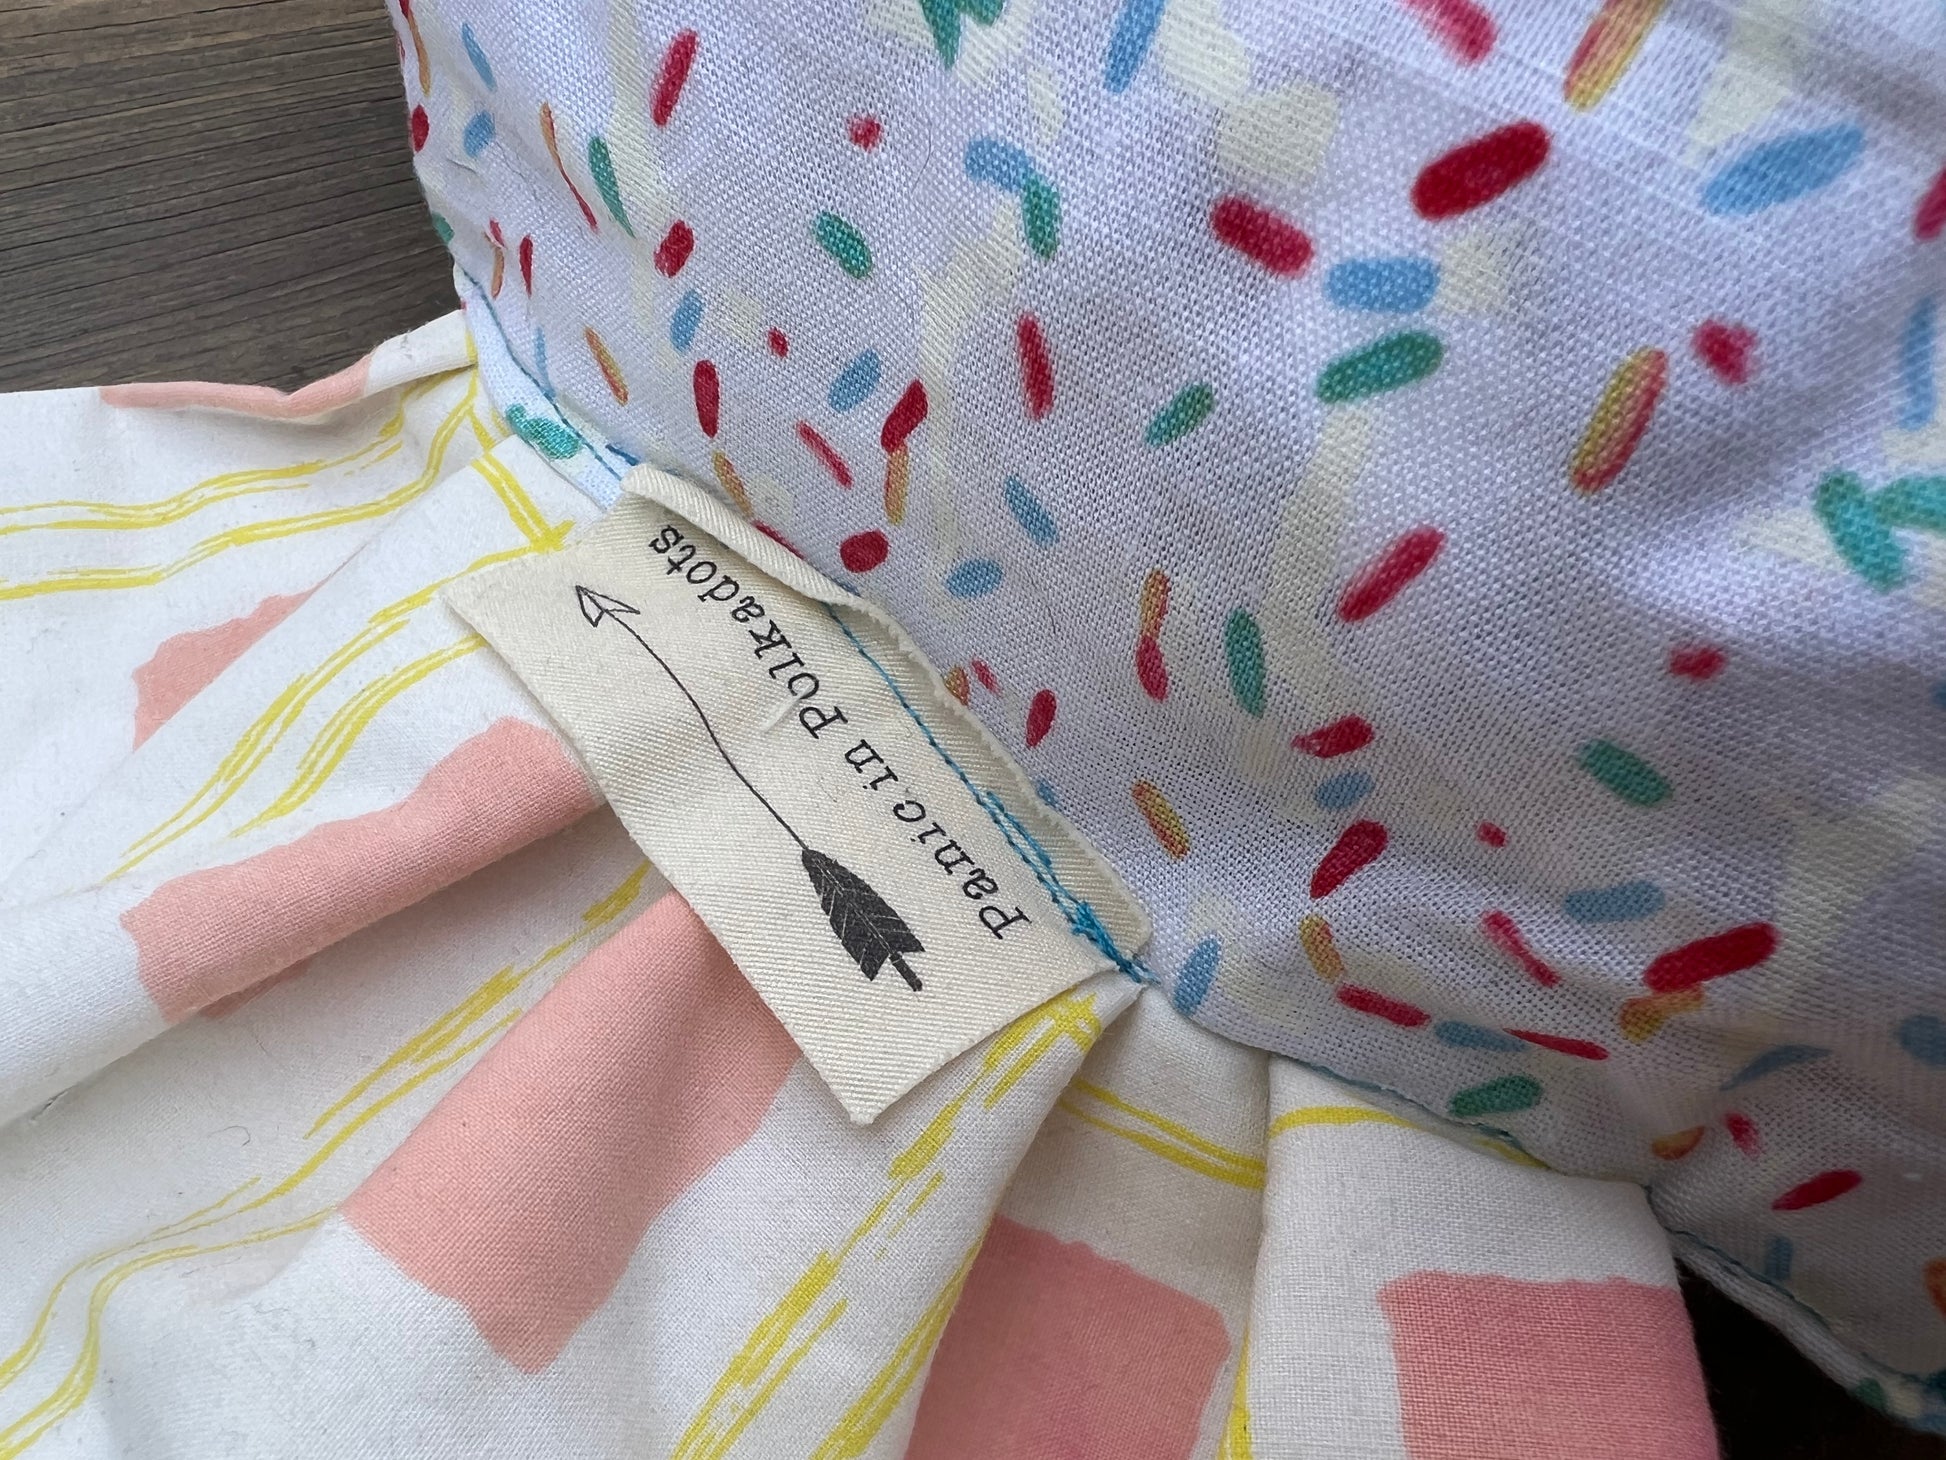 "Panic in Polkadots" label, closeup view, as it is shown sewn into the "wrap" part of candy pillow